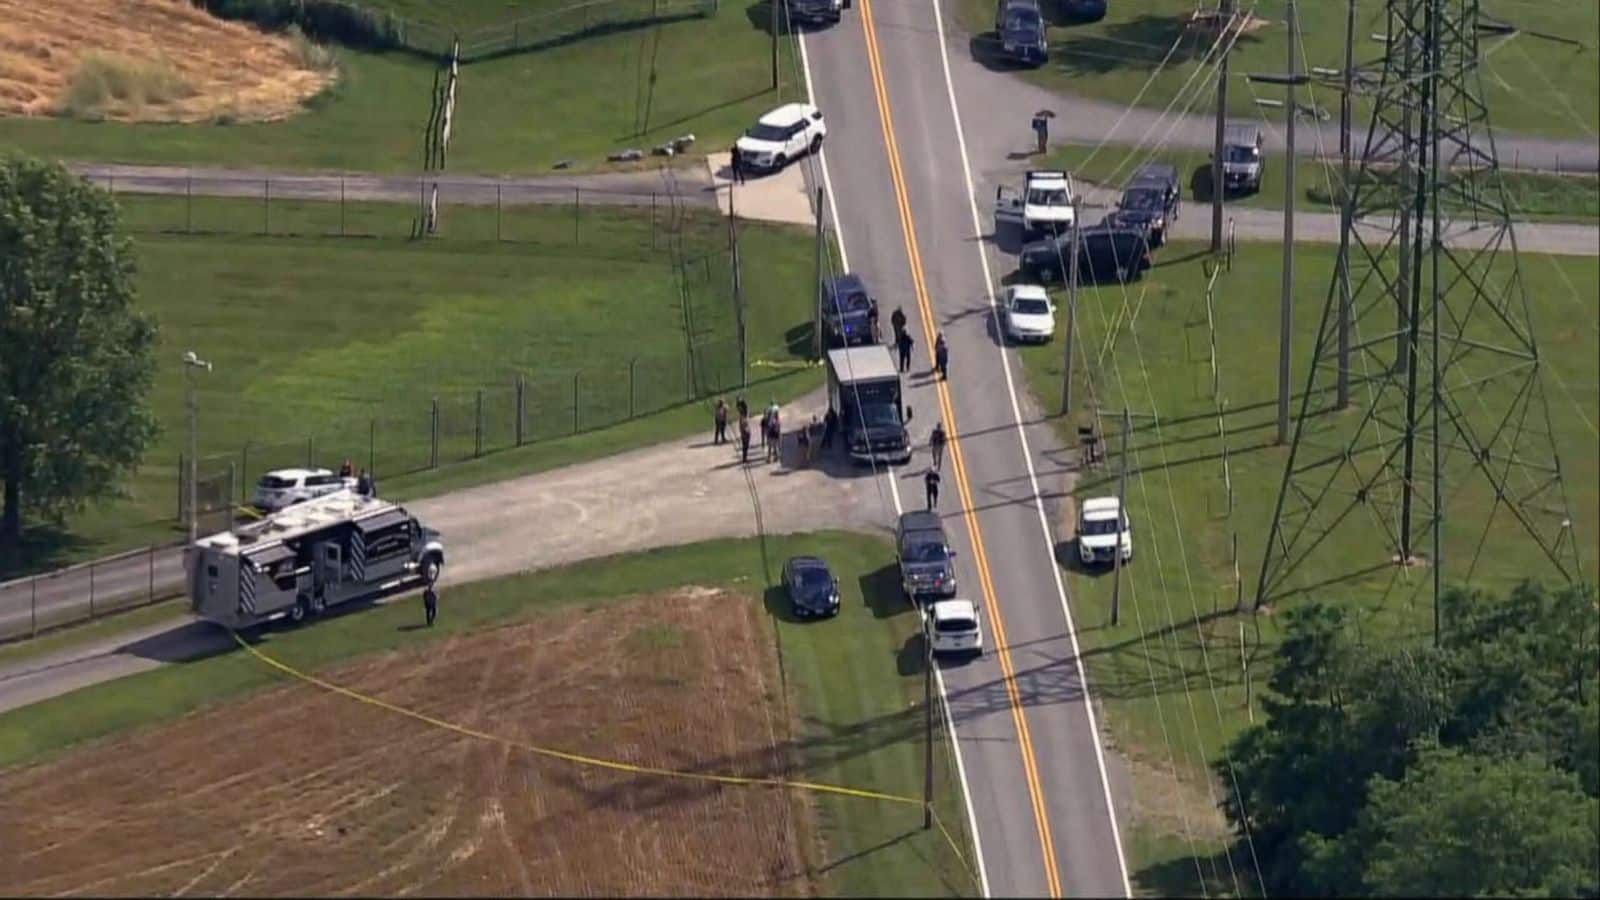 3 dead, 1 injured after shooting in US state of Maryland